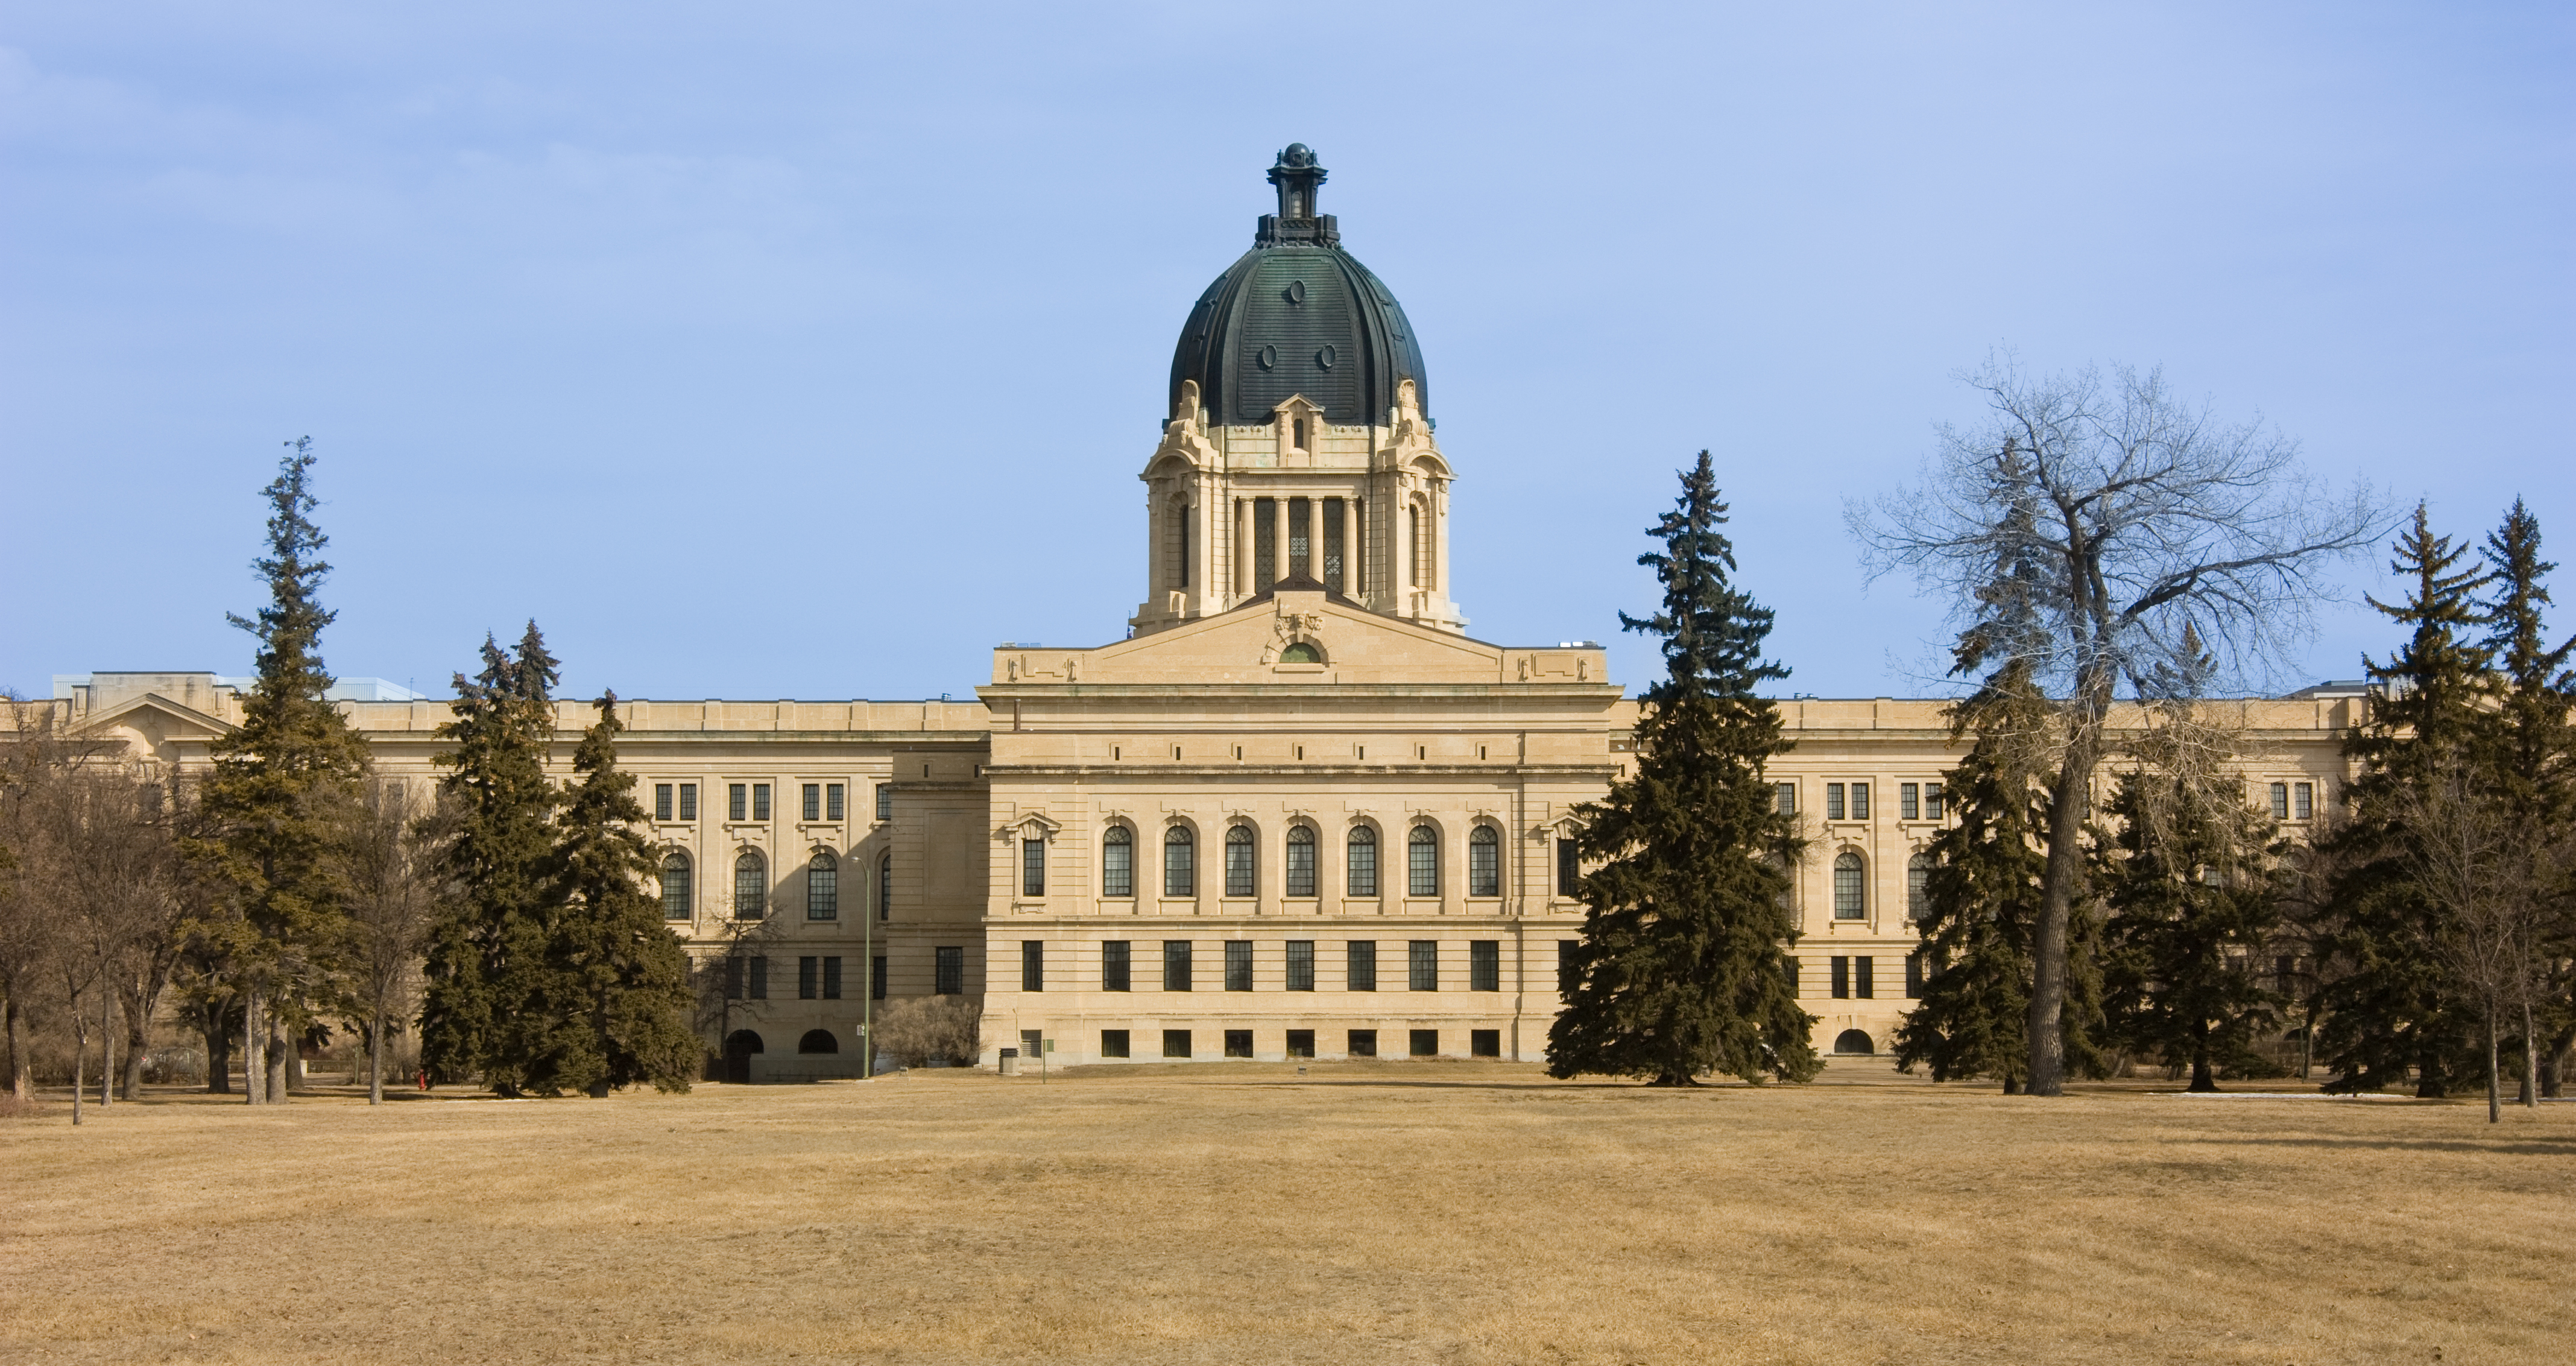 SGEU calls on Sask Party government to amend employment act, and provide long-term funding for Community-Based Organizations